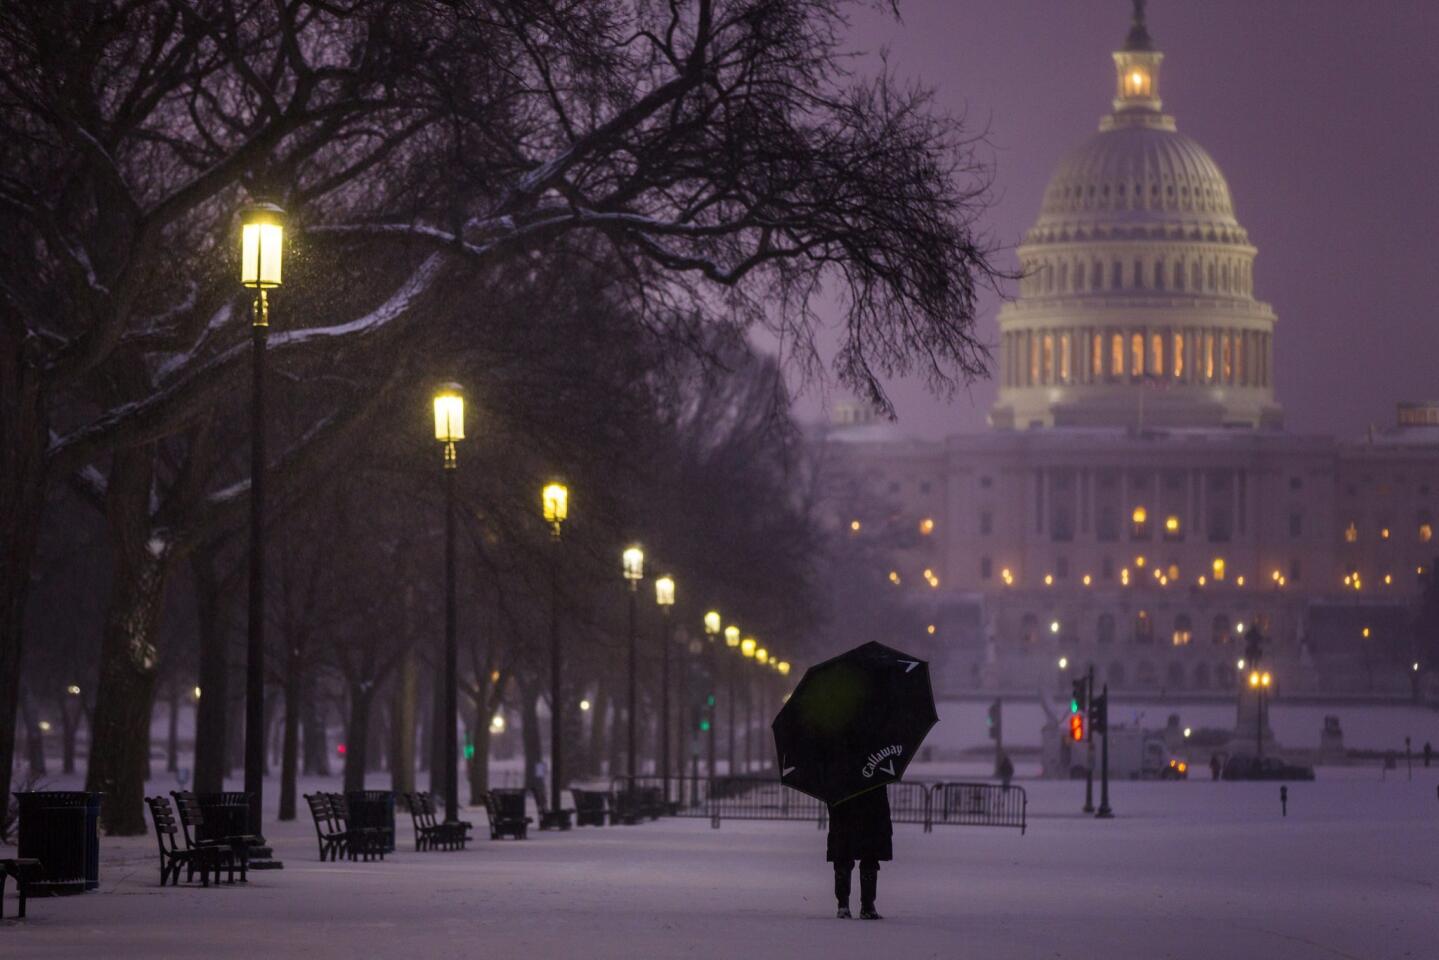 A visitor to the National Mall pauses in a late afternoon snowfall in Washington, D.C.